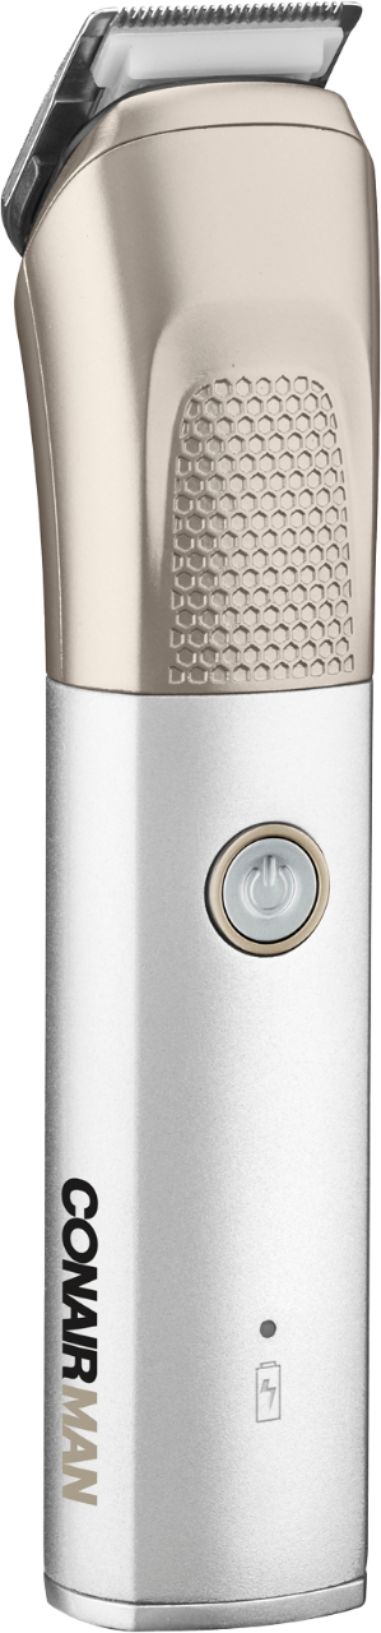 Left View: Wahl - Stainless Steel LI Trimmer - 09898 - Silver - Stainless Steel